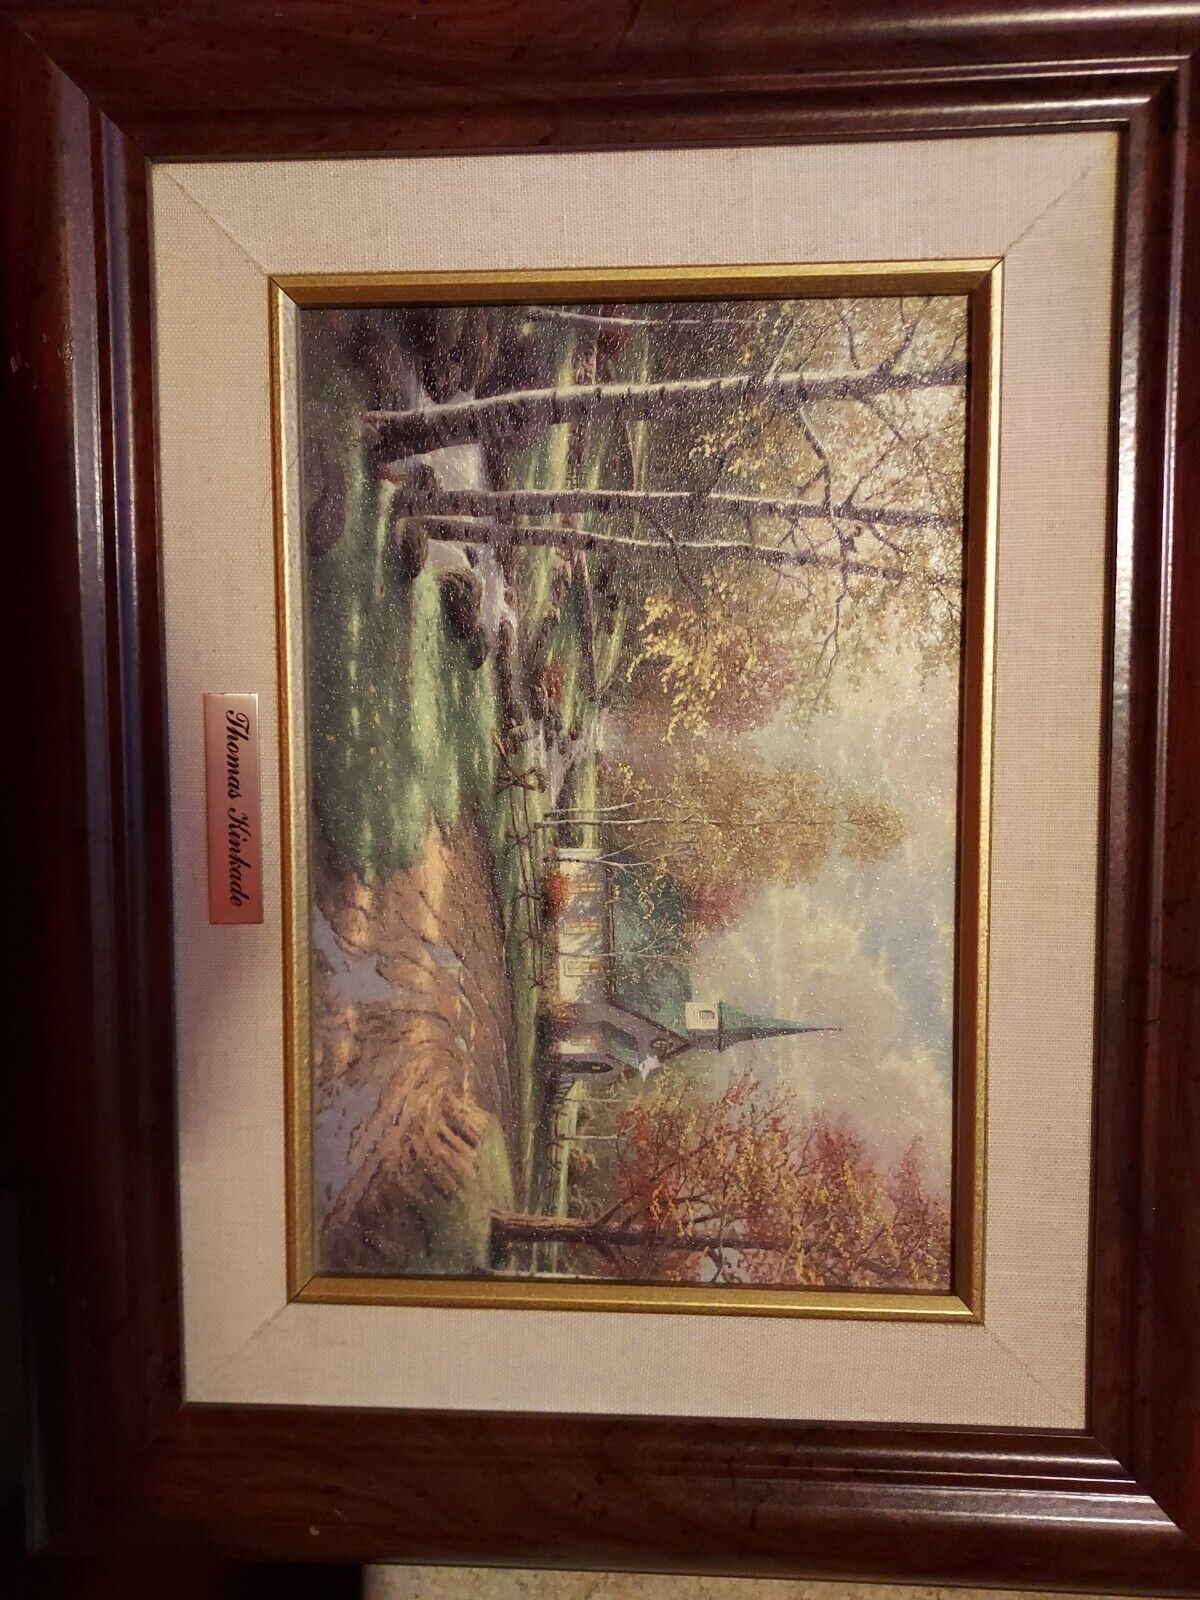 The Aspen Chapel By Thomas Kinkade Framed 8x10 with certificate of authenticity 